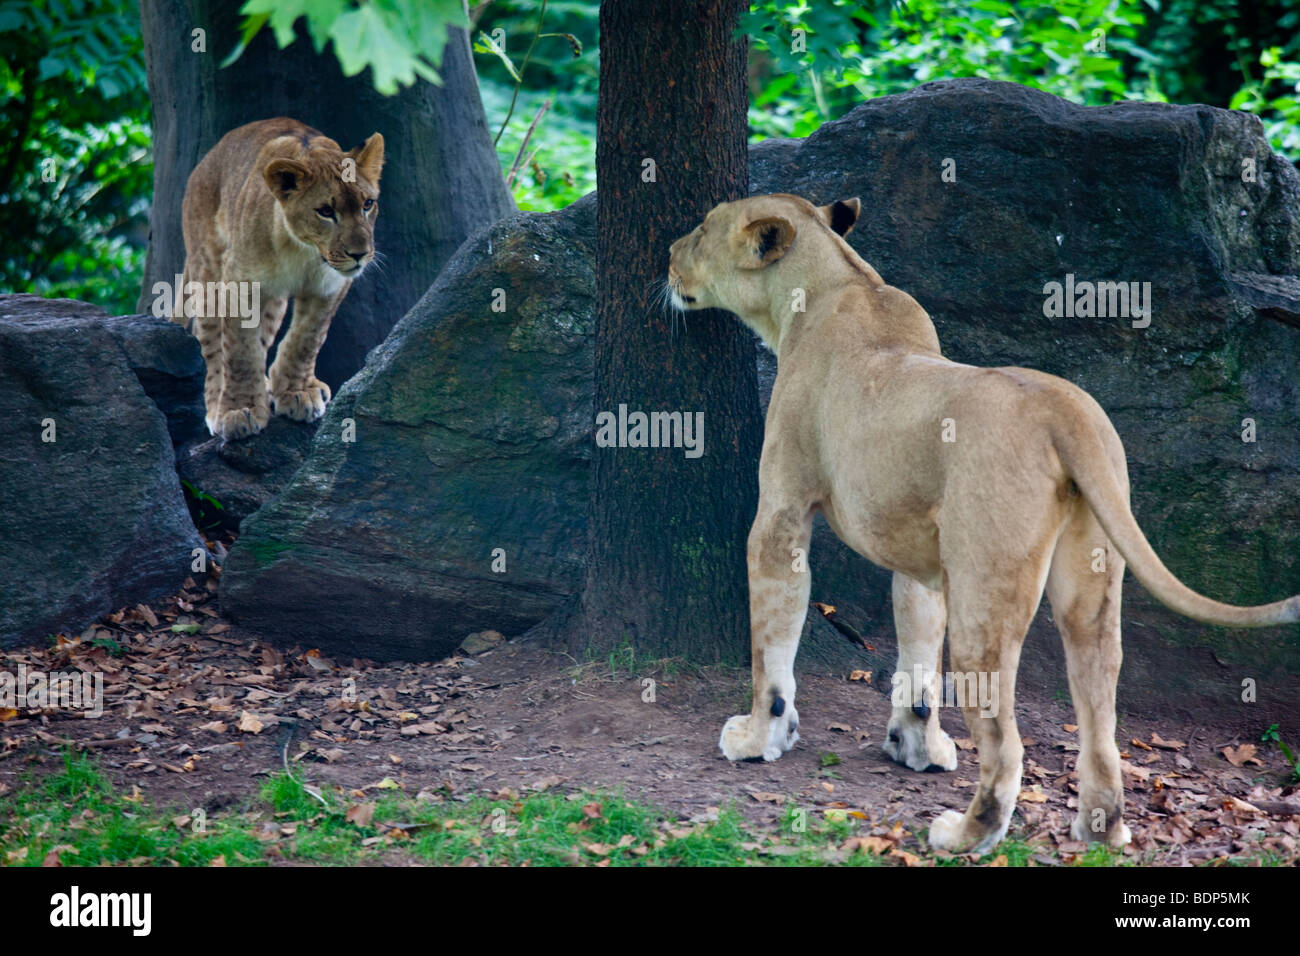 Lioness and Cub at the Bronx Zoo in New York Stock Photo